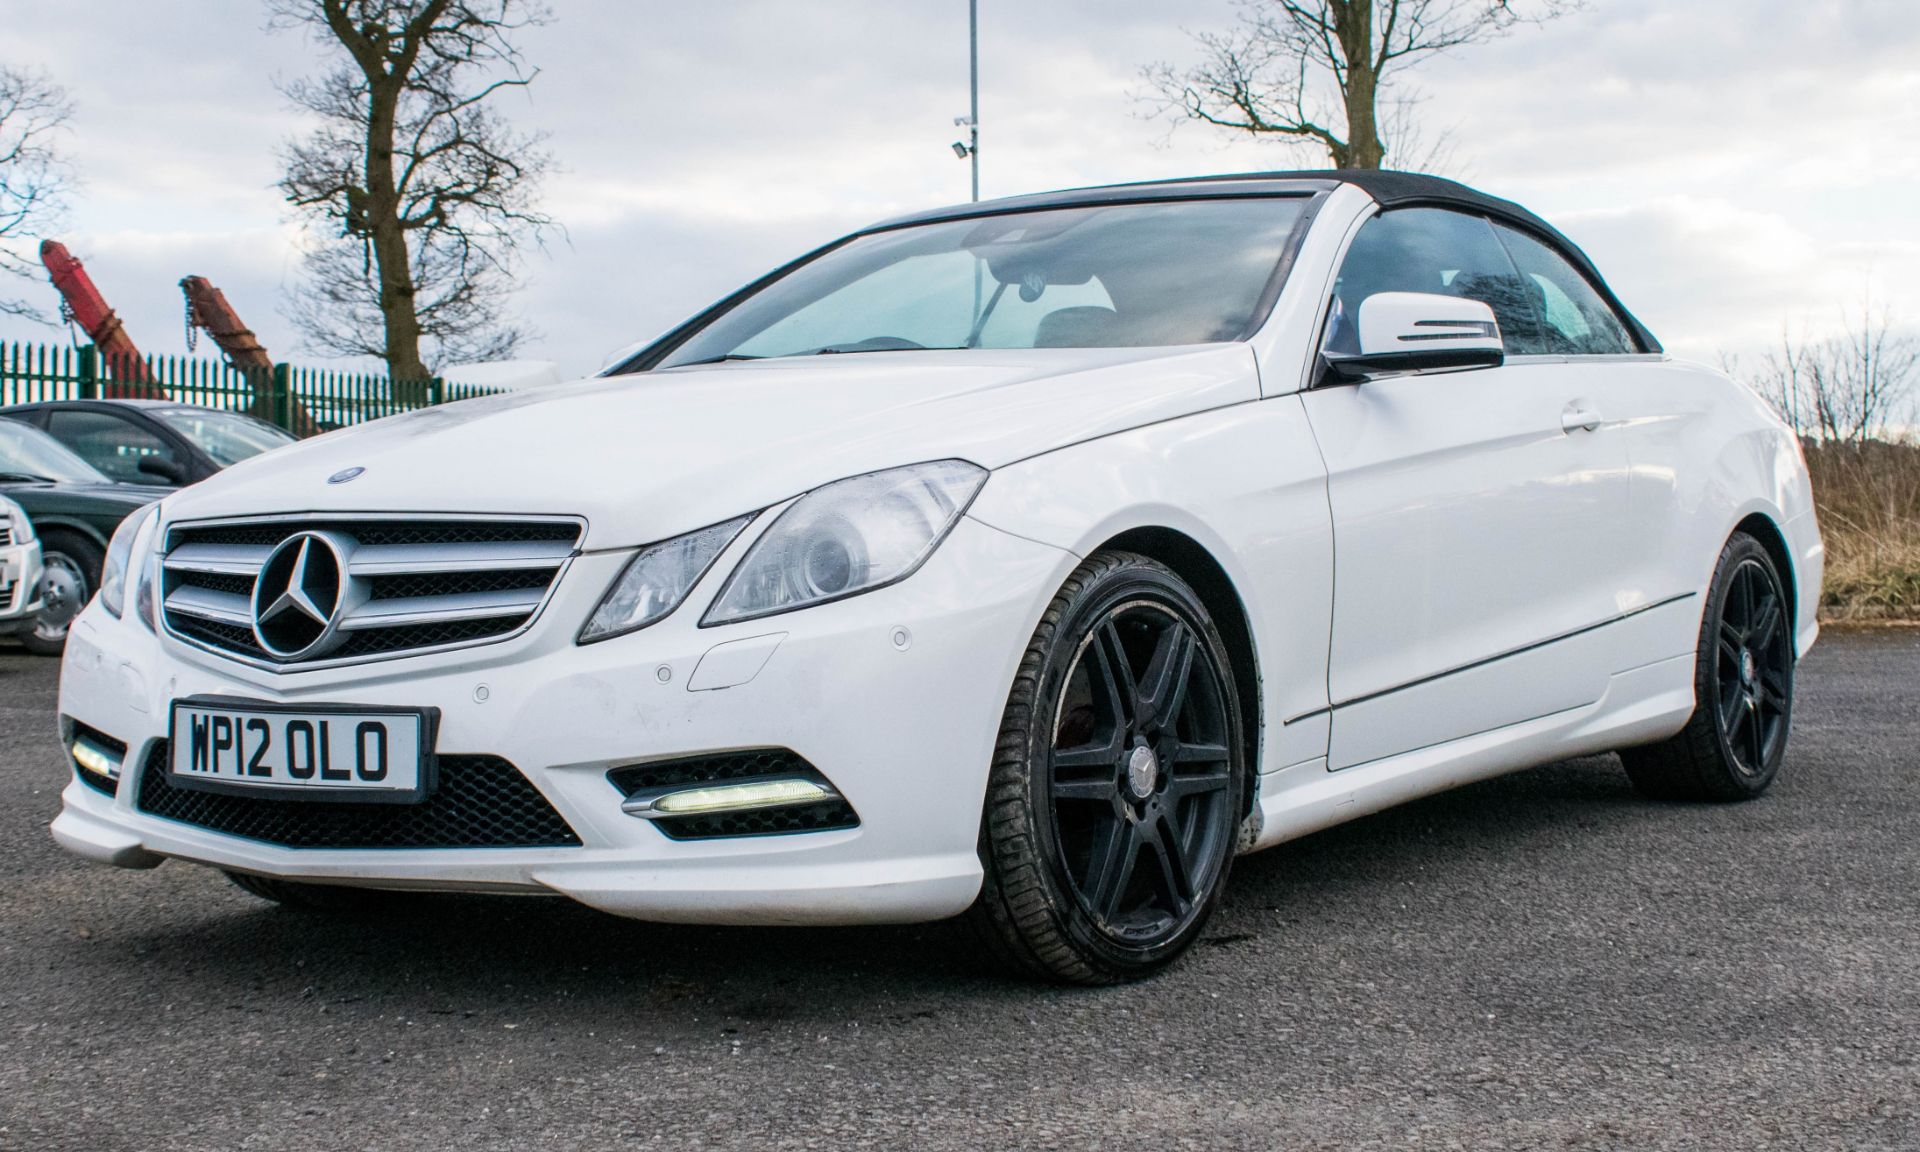 Mercedes Benz E250 sport CDI diesel convertible car Registration number: WP12 OLO Date of